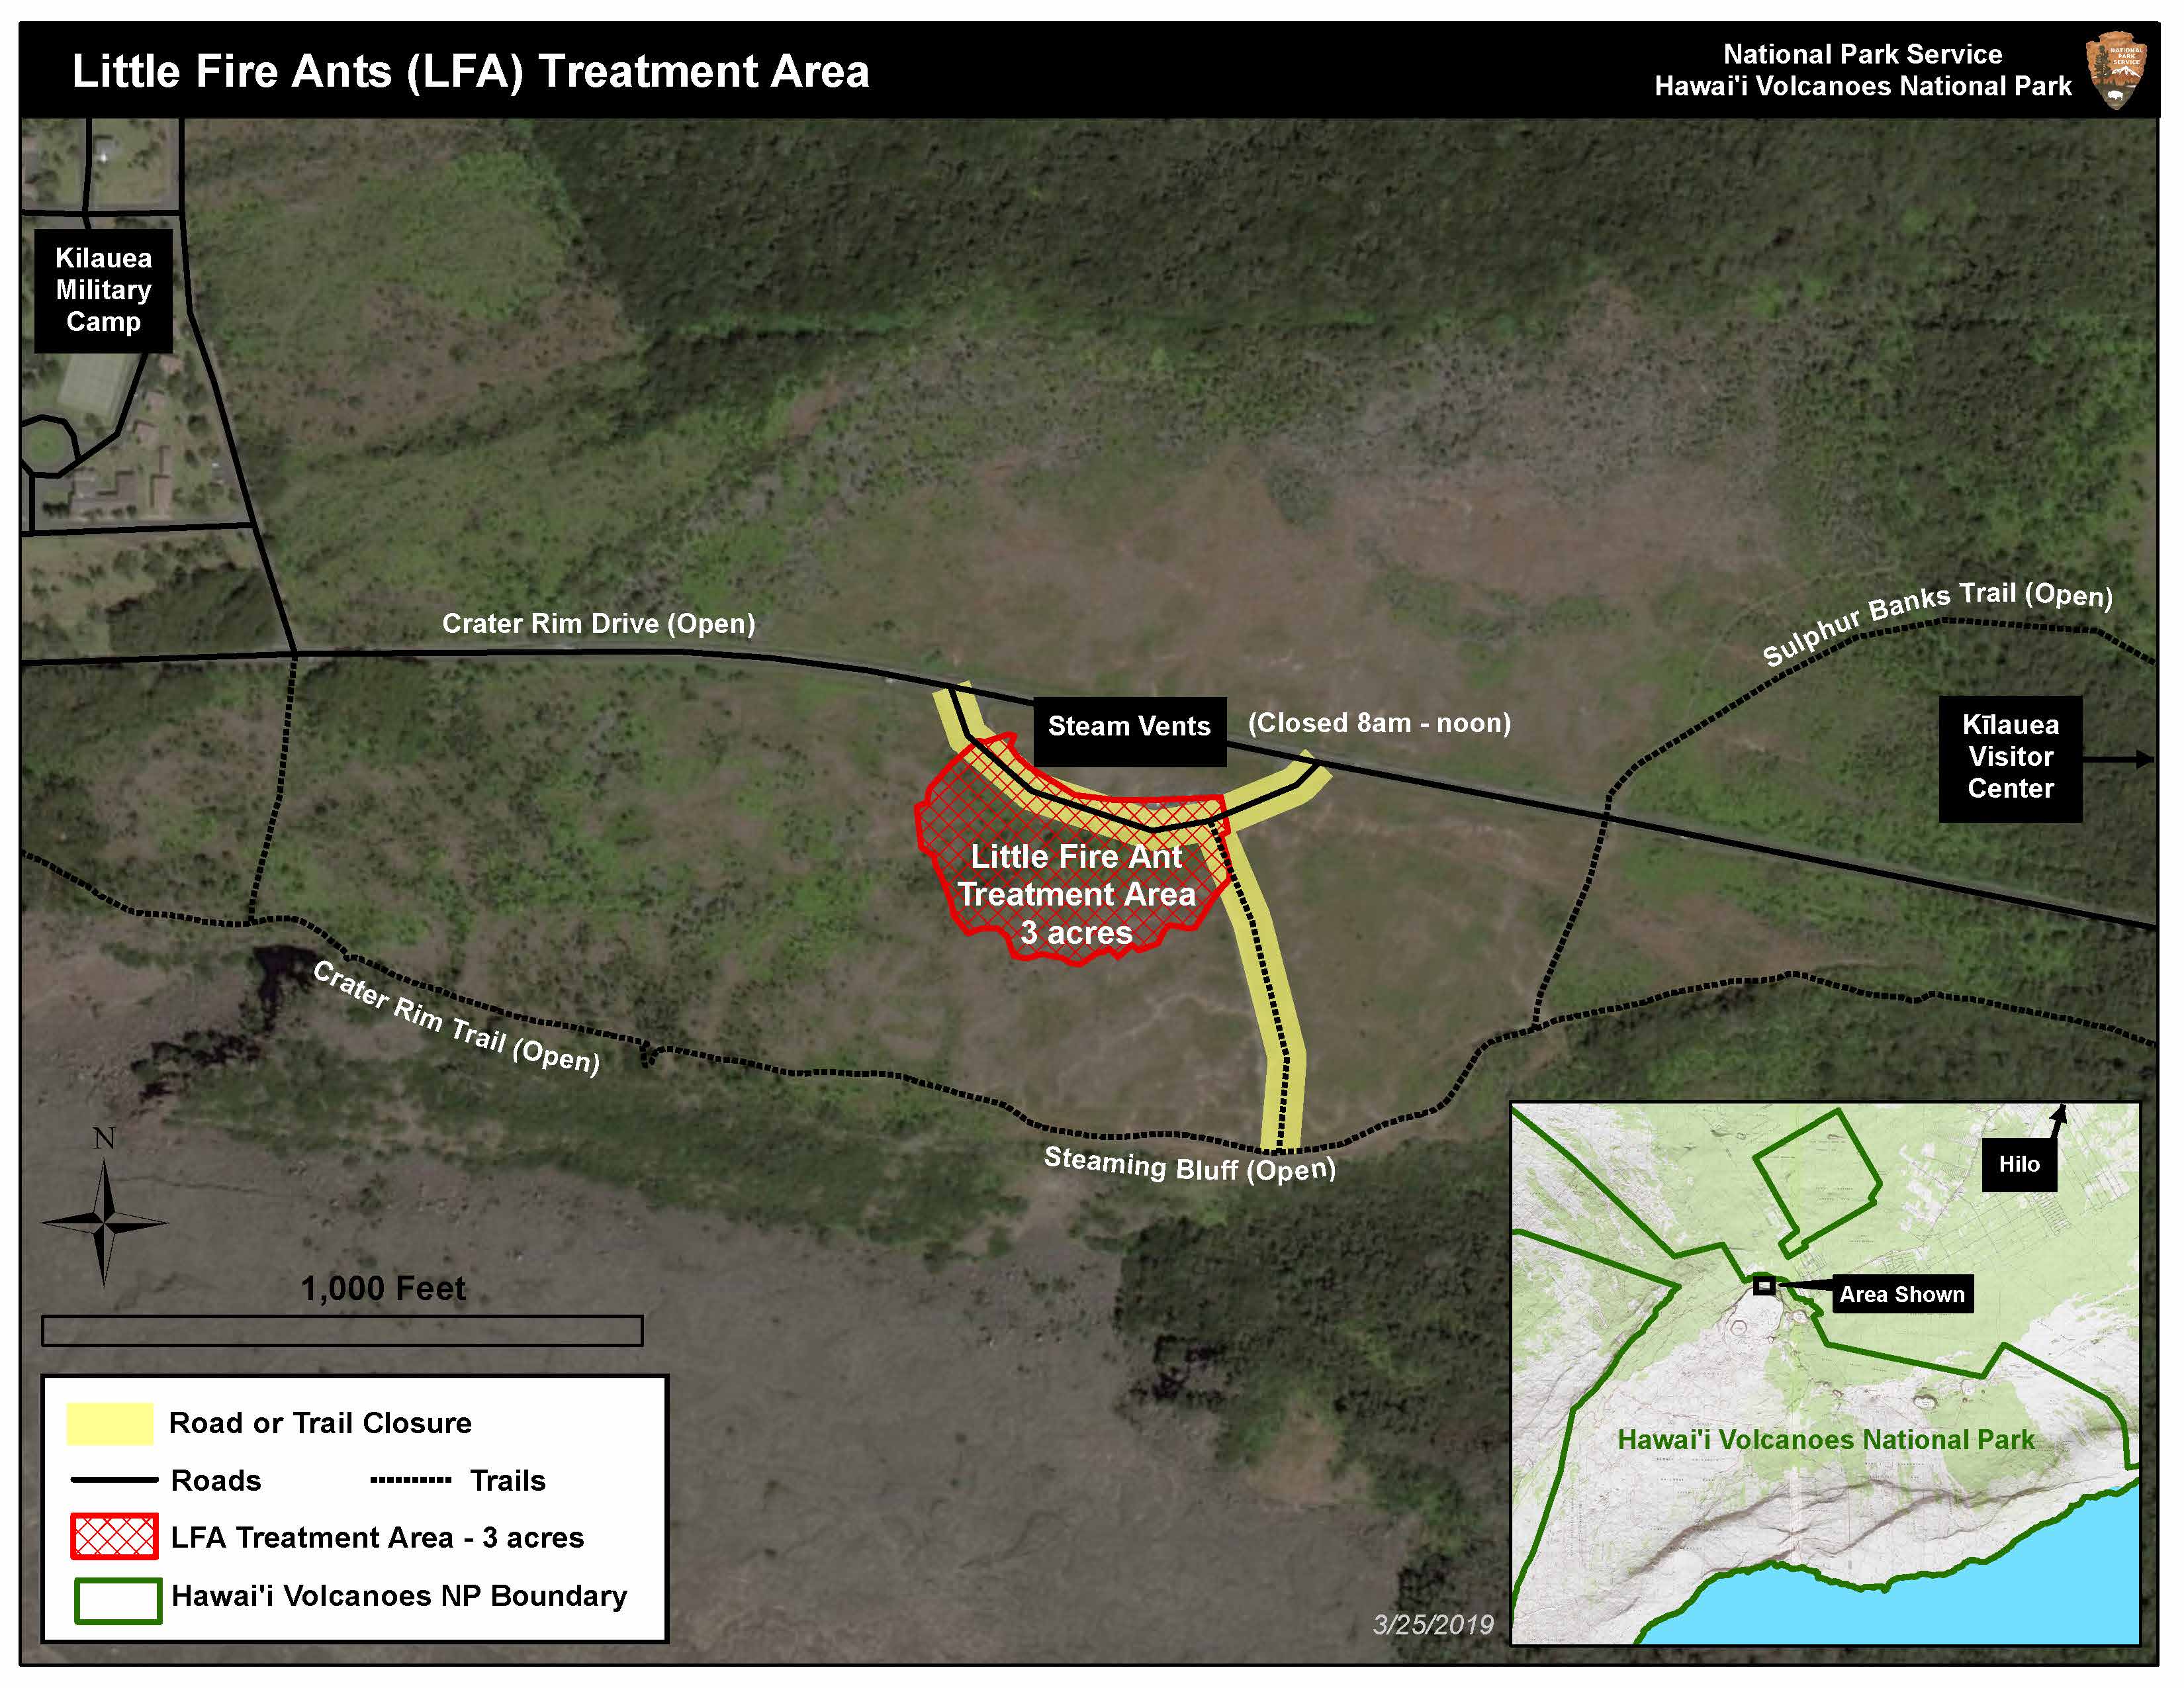 Map of little fire ant infestation and closure area in park